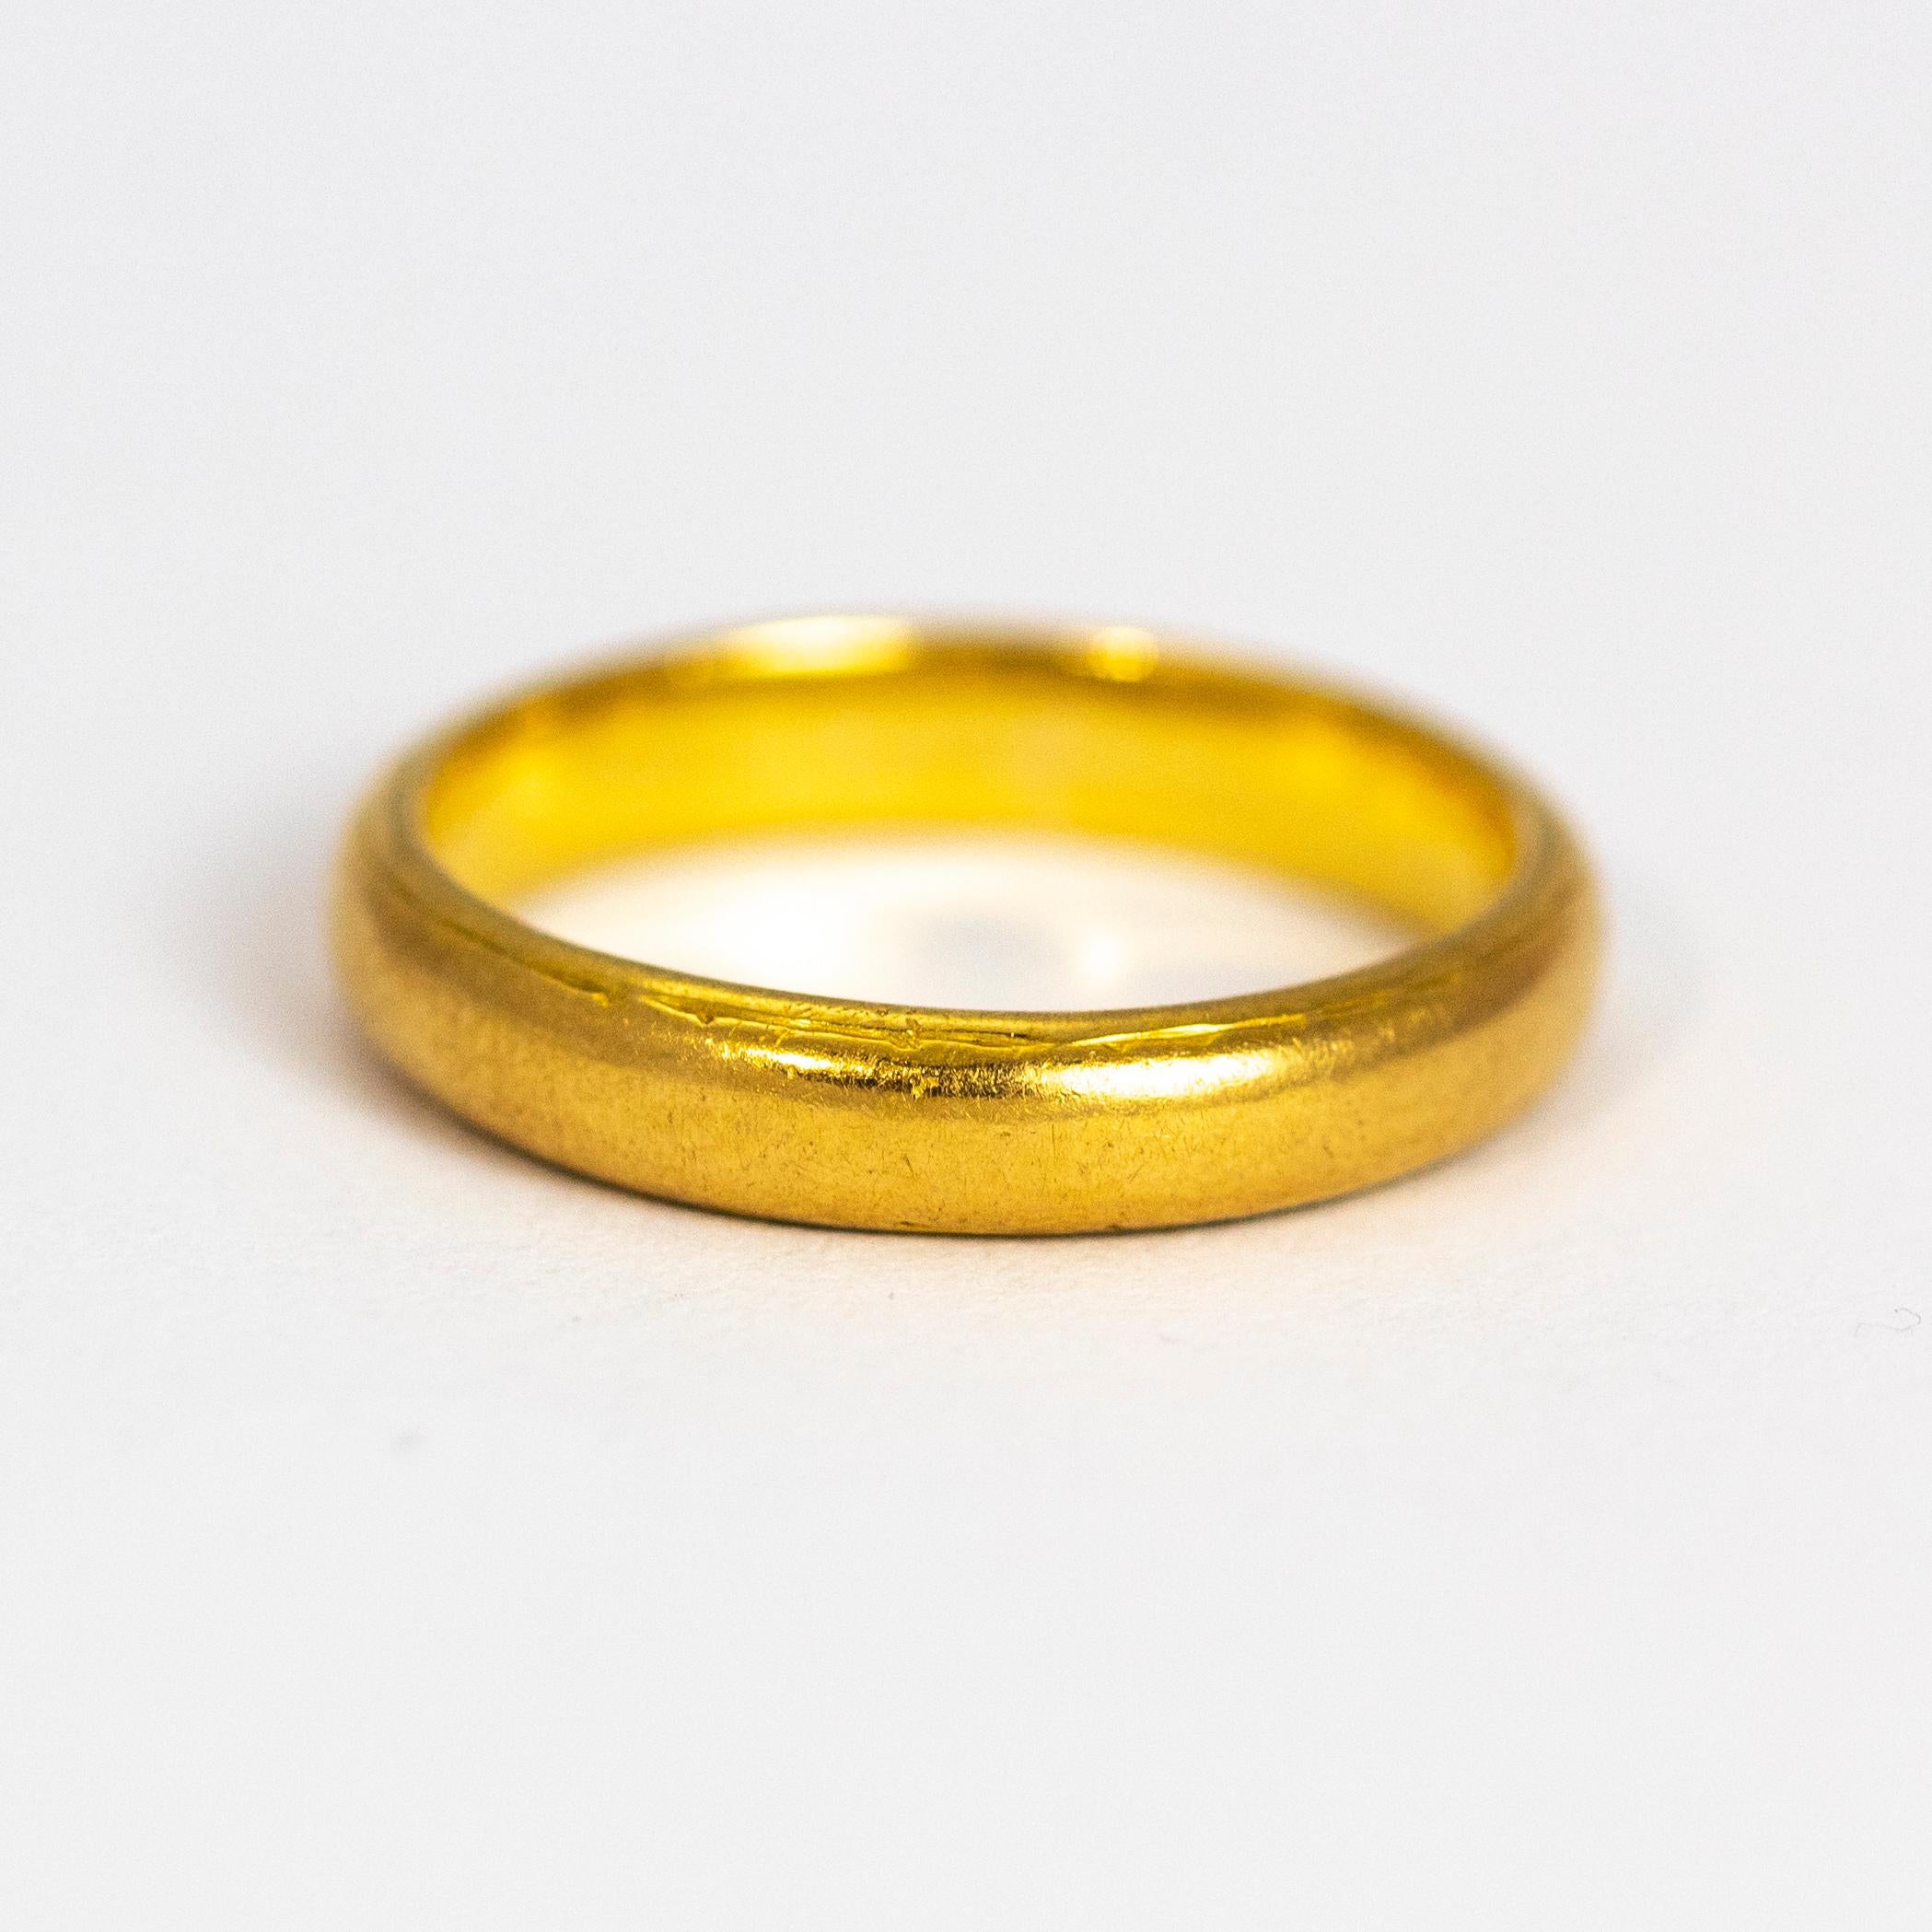 Liberty & Co glossy gold band. Perfect for everyday wear or a designer wedding band. Modelled out of 22ct gold.

Ring Size: J or 4 3/4
Band Width: 3mm
